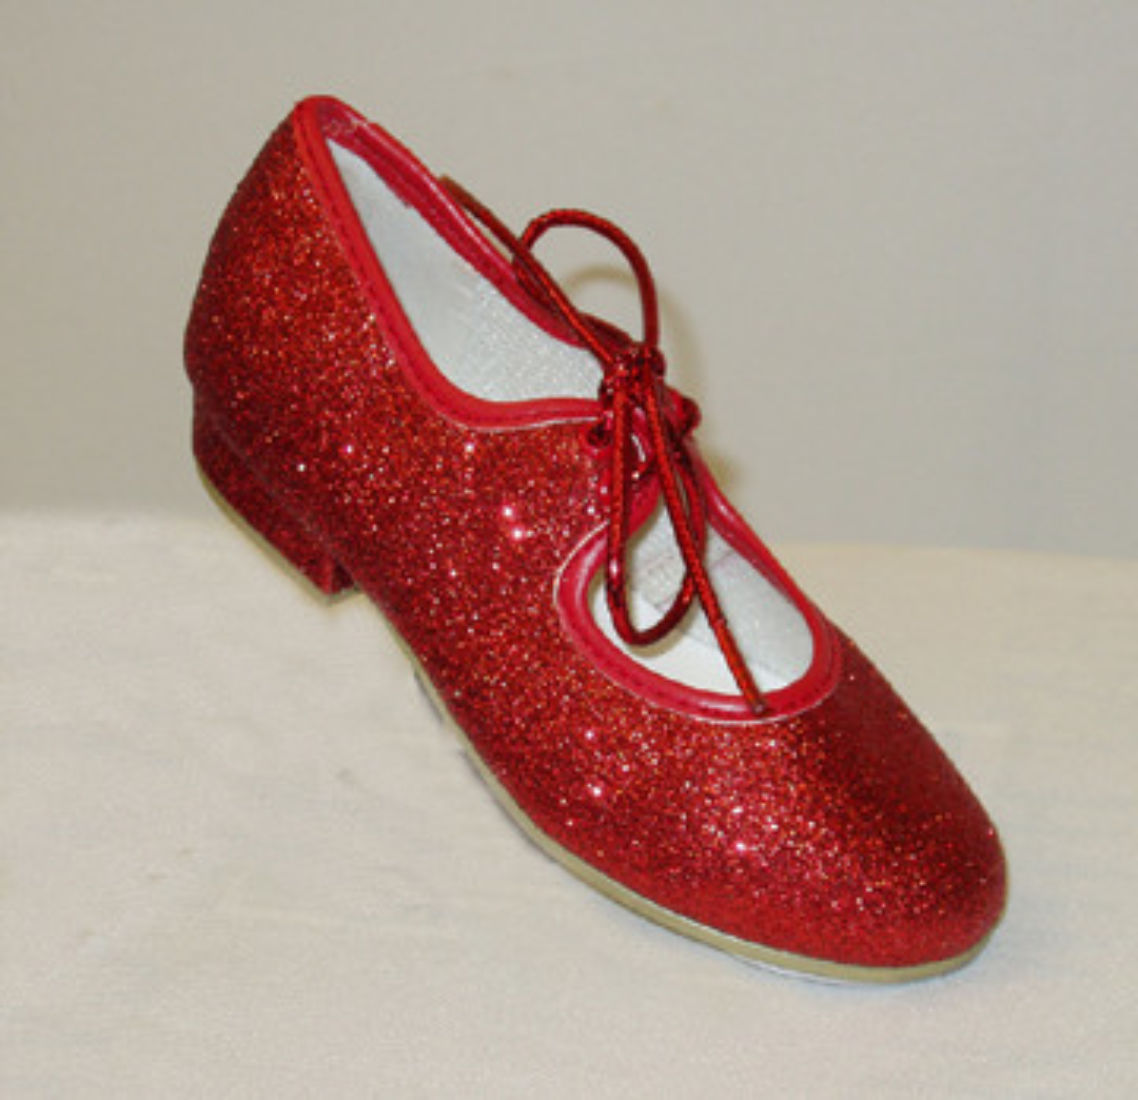 red glitter dance shoes